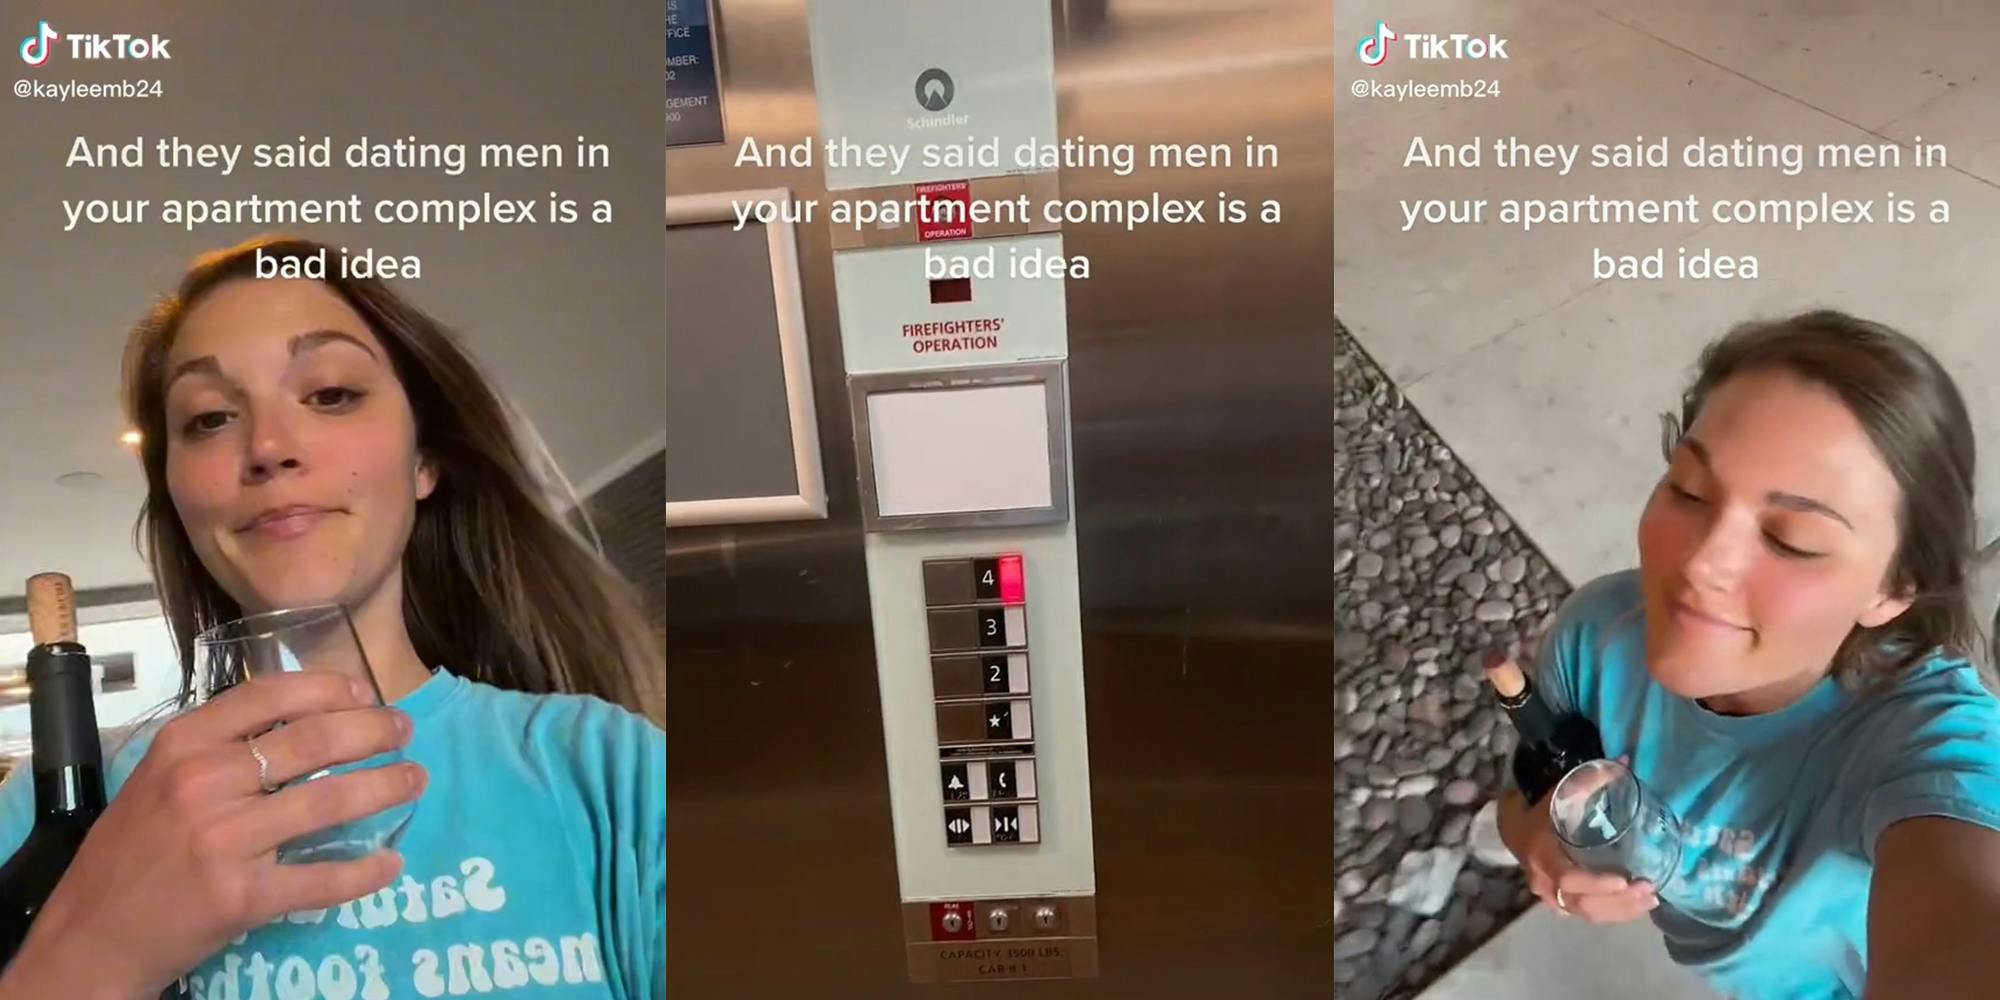 young woman with wine bottle and glass walking through apartment complex (l&r) elevator buttons (c) all with caption "And they said daitng men in your apartment complex is a bad idea"